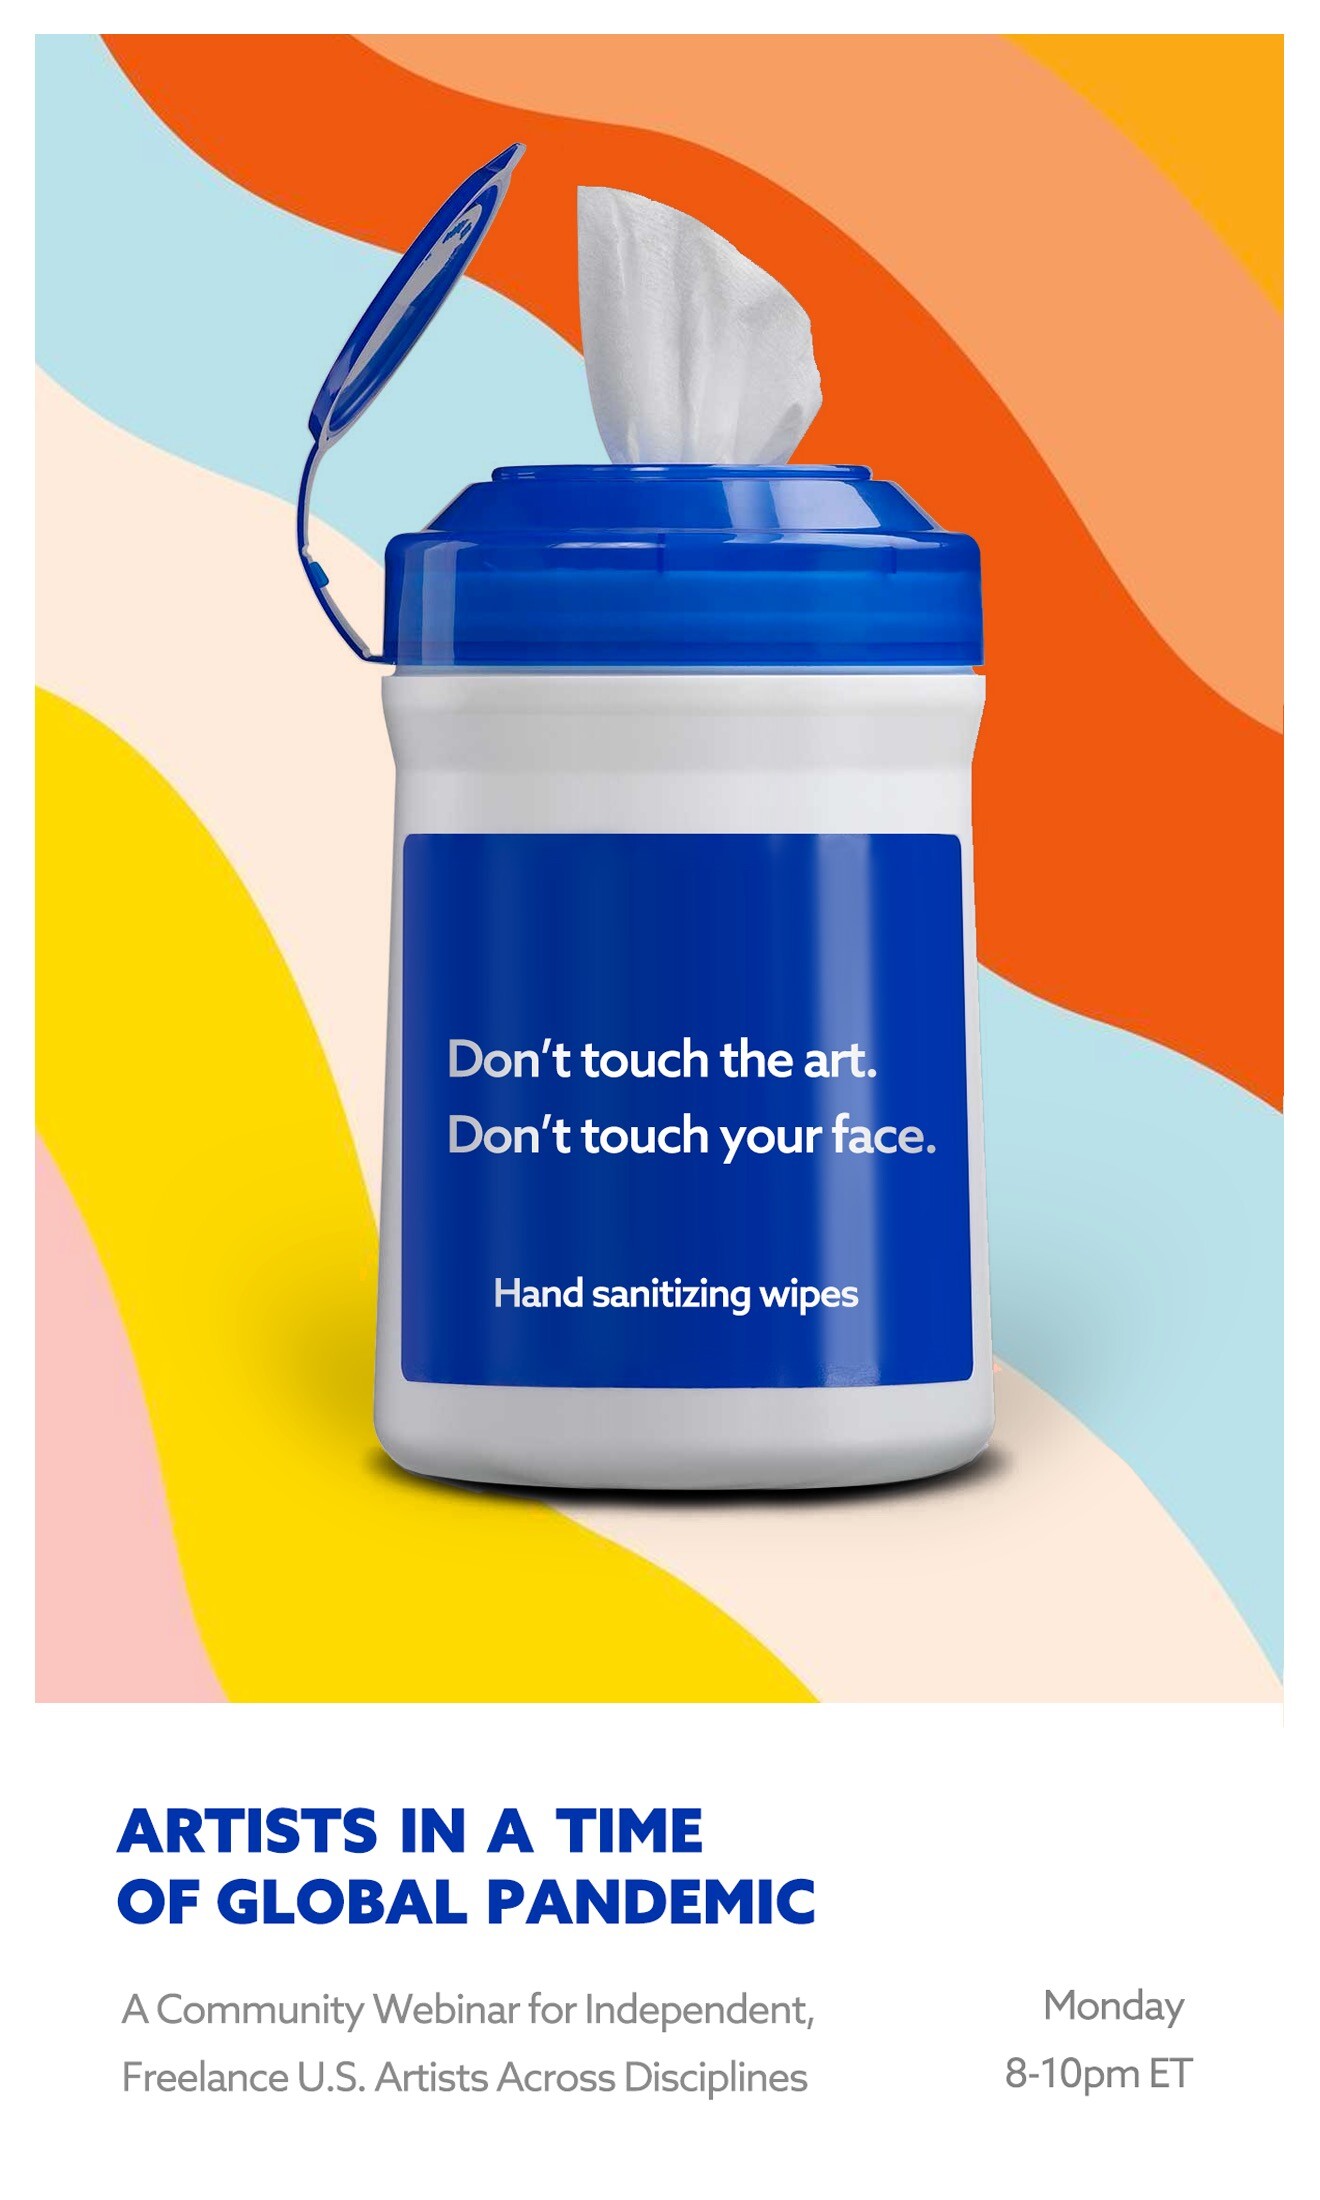 cleaning wipes that say "don't touch my art".